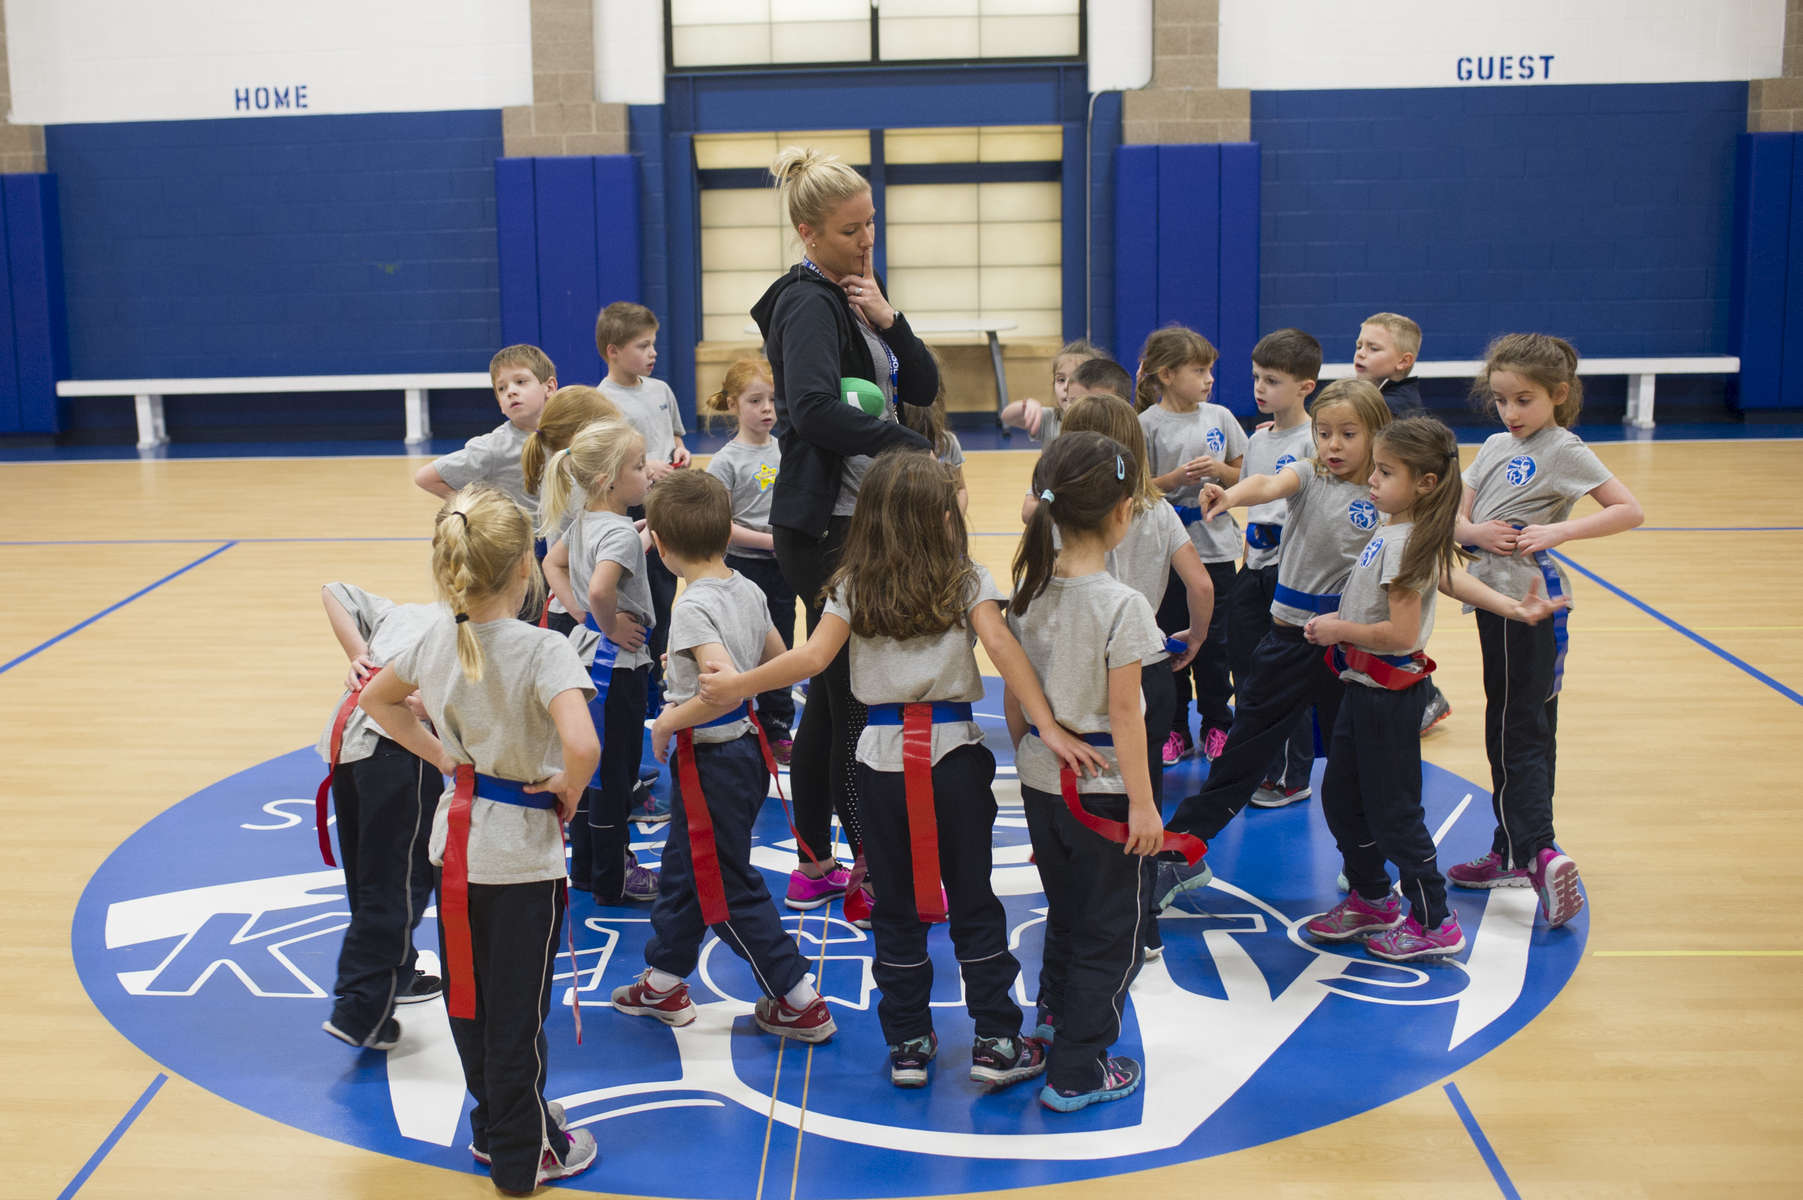 First grade students gather around physical education teacher Katie Krupa as she prepares to teach them flag-football in the gymnasium at St. Mary of the Woods Catholic School in the Edgewater neighborhood of Chicago, November 11, 2016.